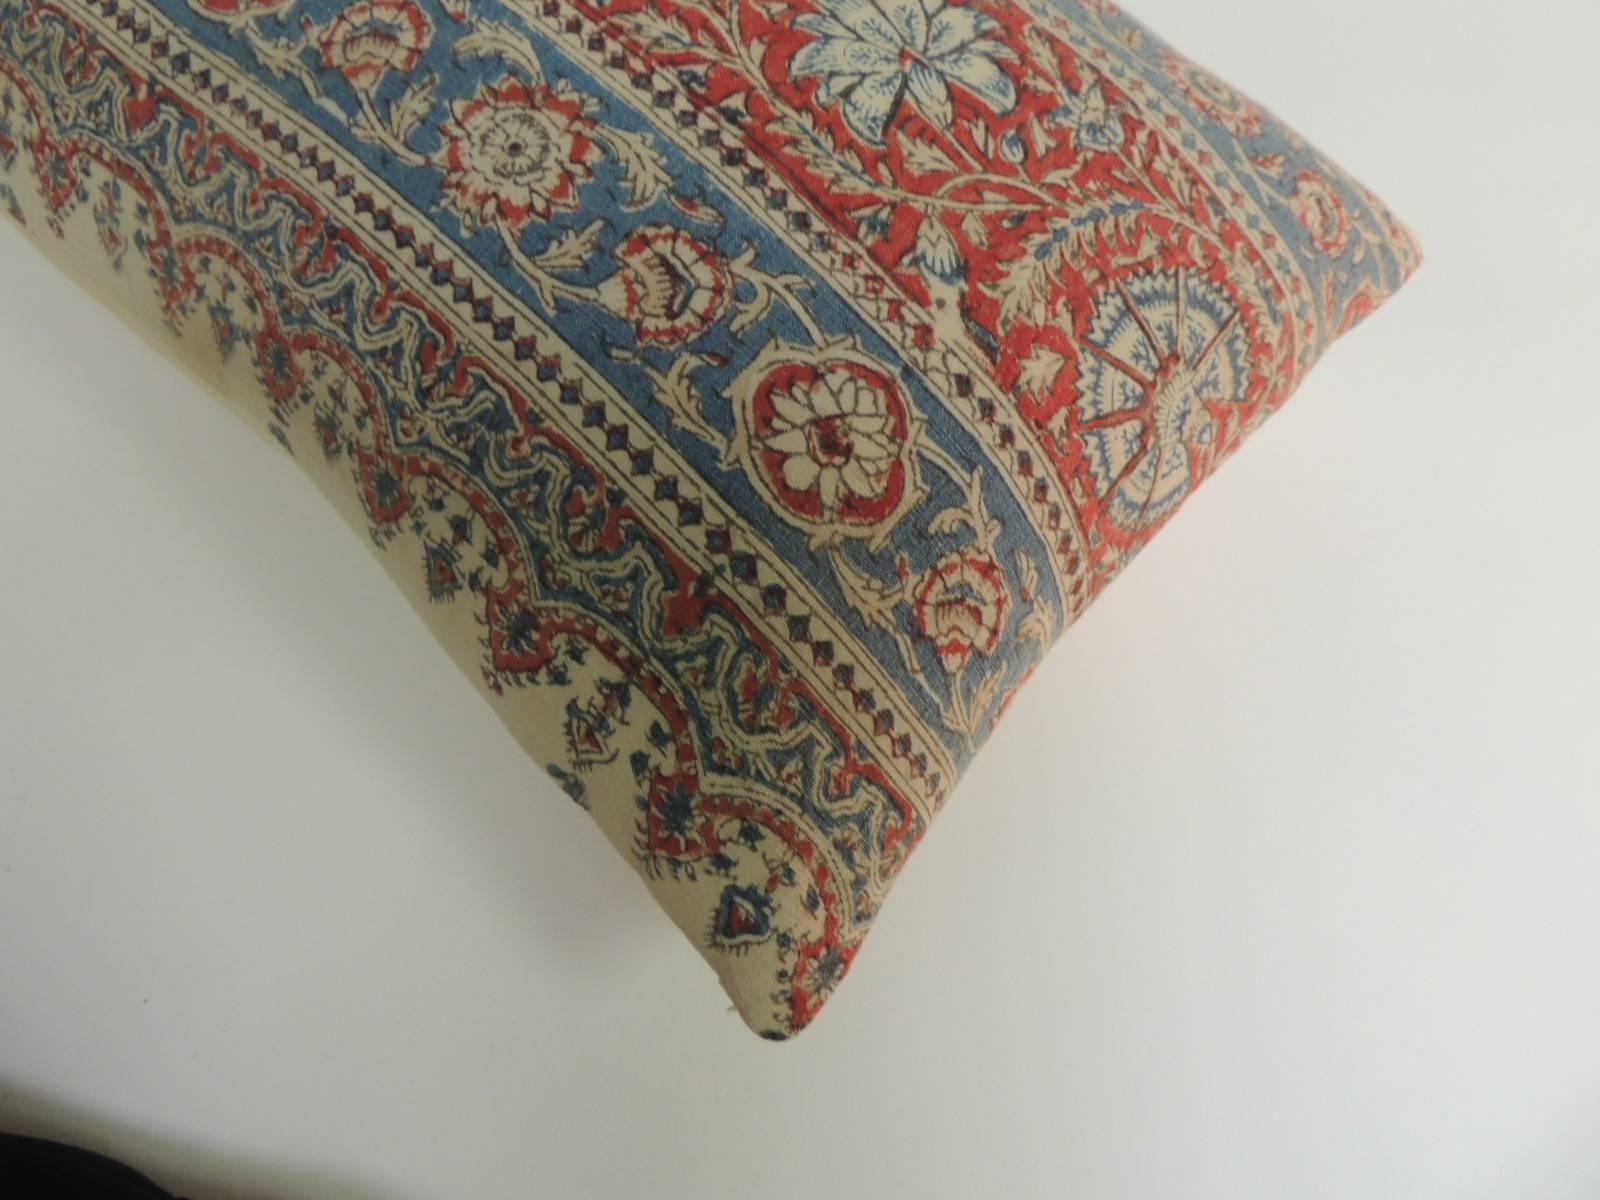 Persian Vintage Indian Hand-Blocked Floral Textile Decorative Bolster Pillow